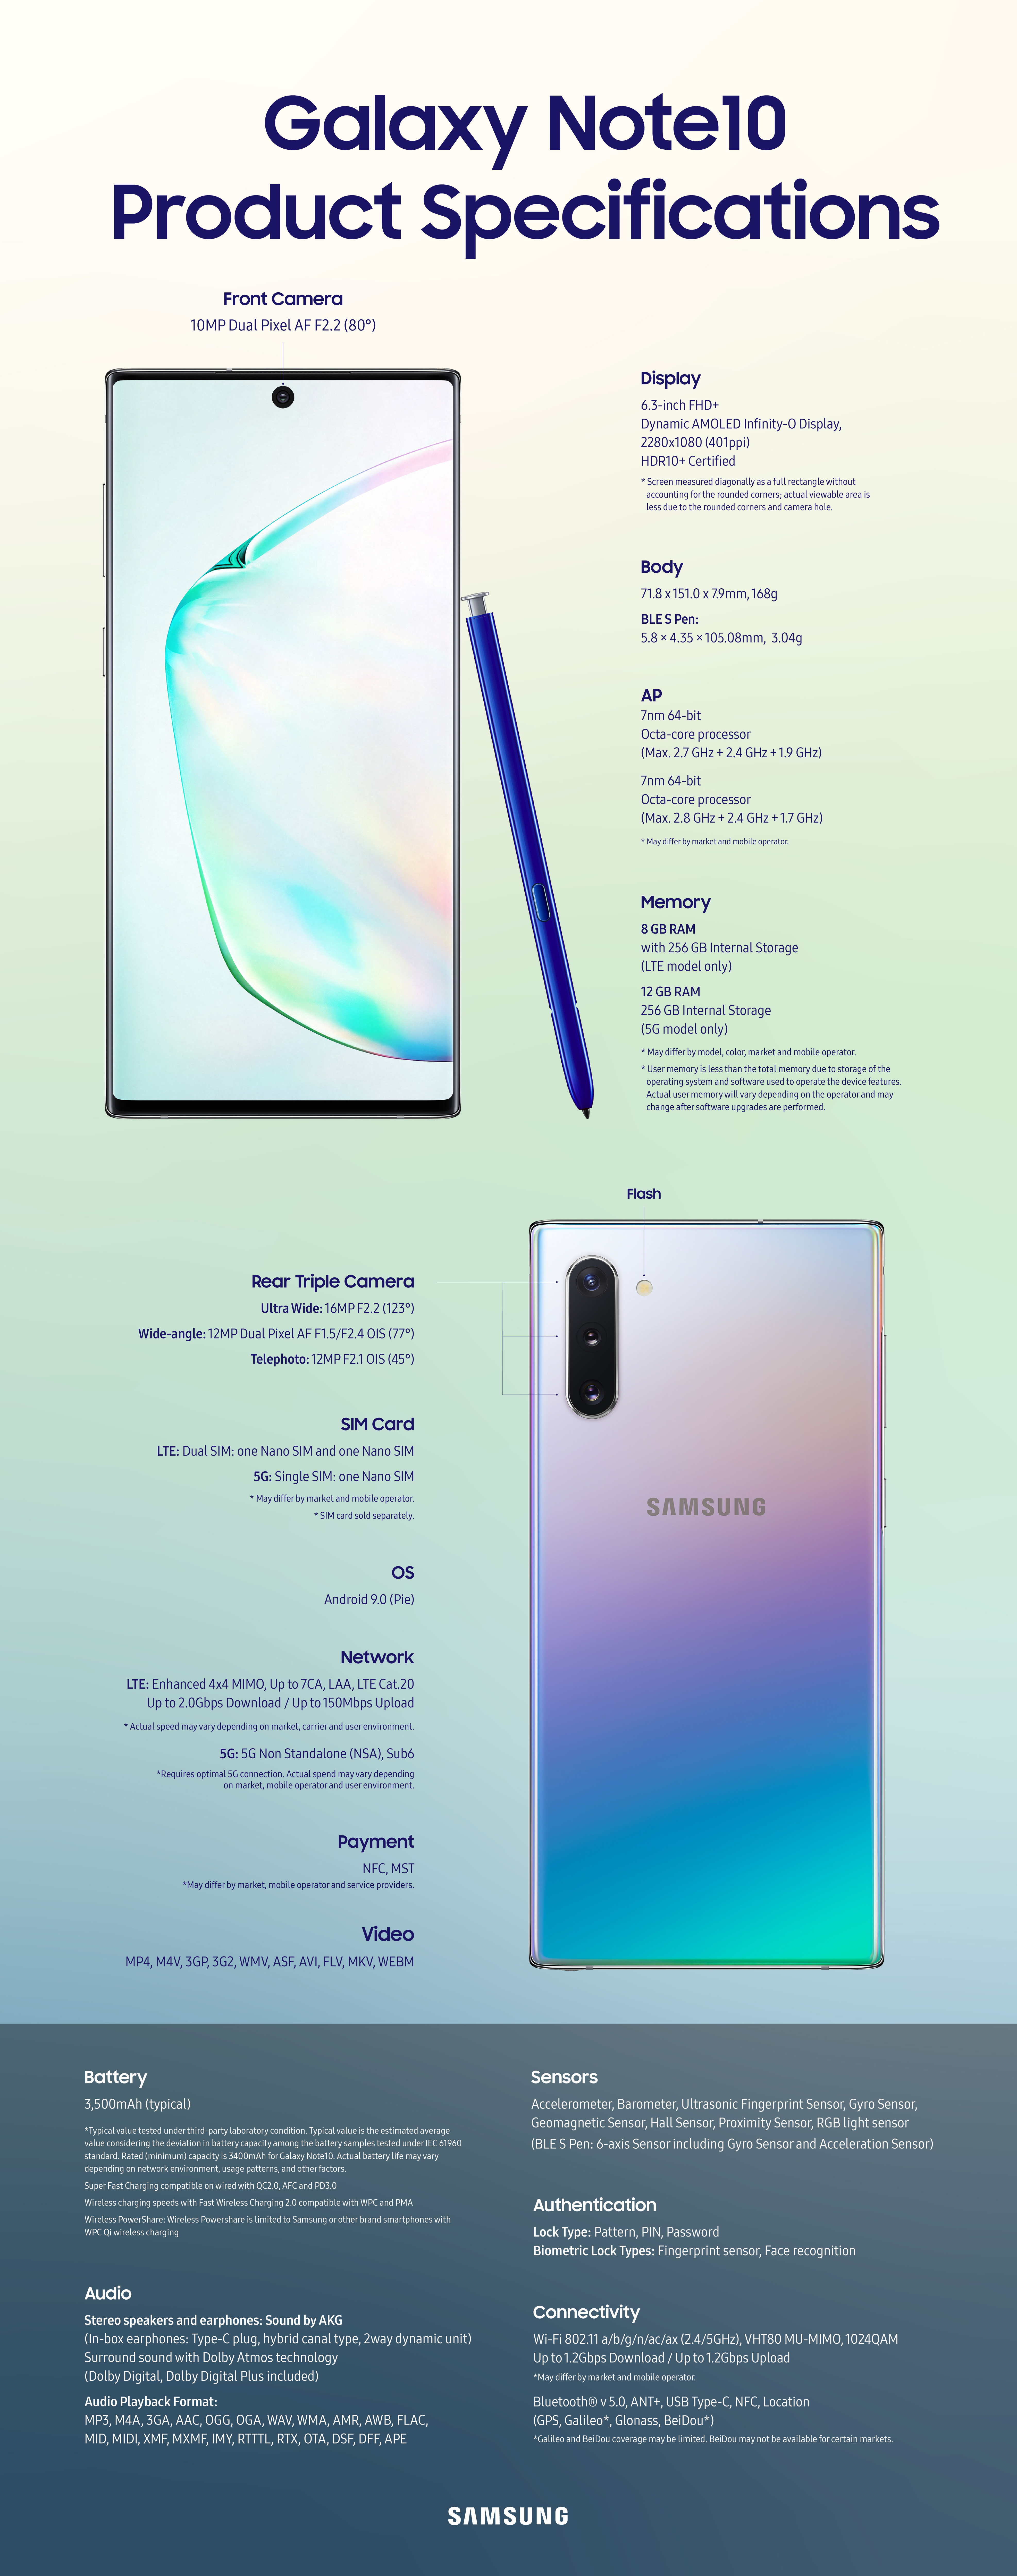 Introducing Galaxy Note10: Designed to Bring Passions to Life with